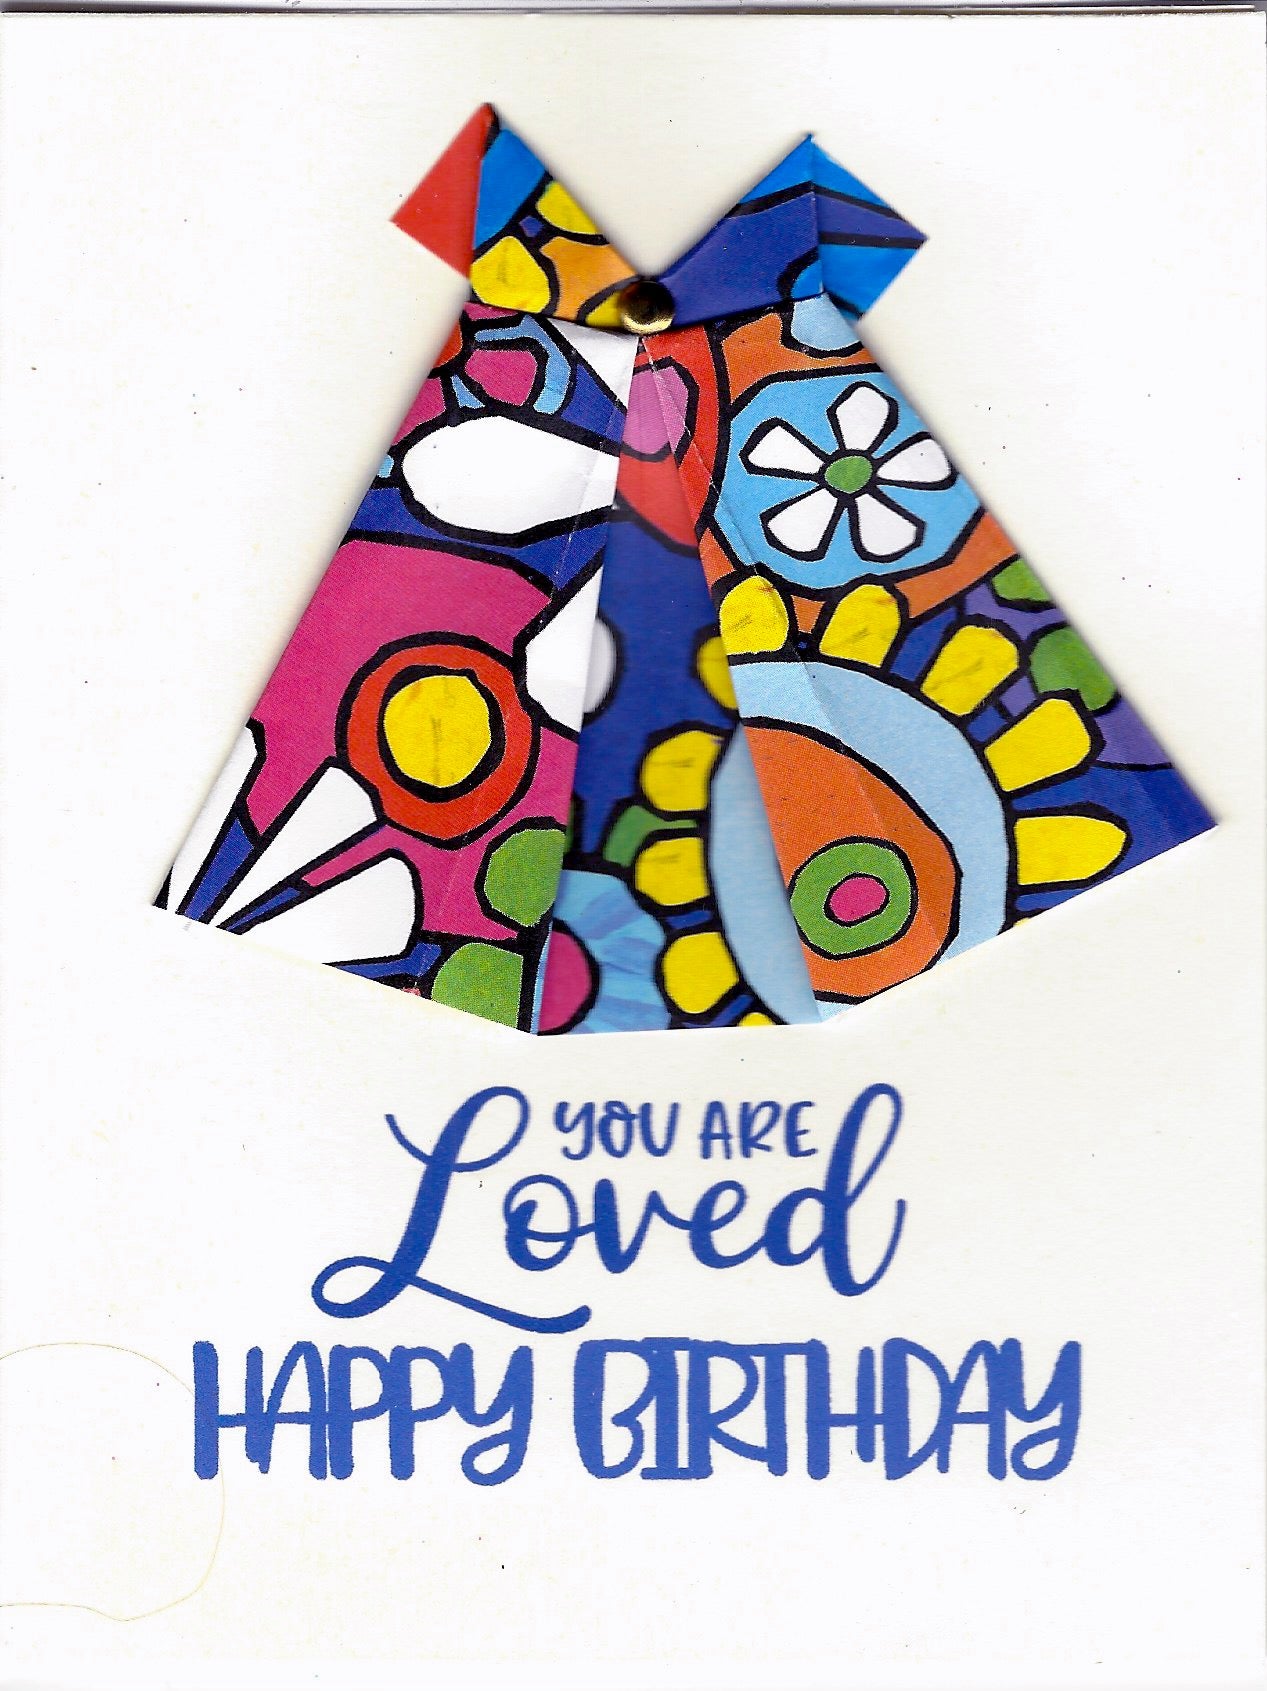 You are Loved - Happy Birthday one of a kind origami dress birthday card Virginia Fitzgerald